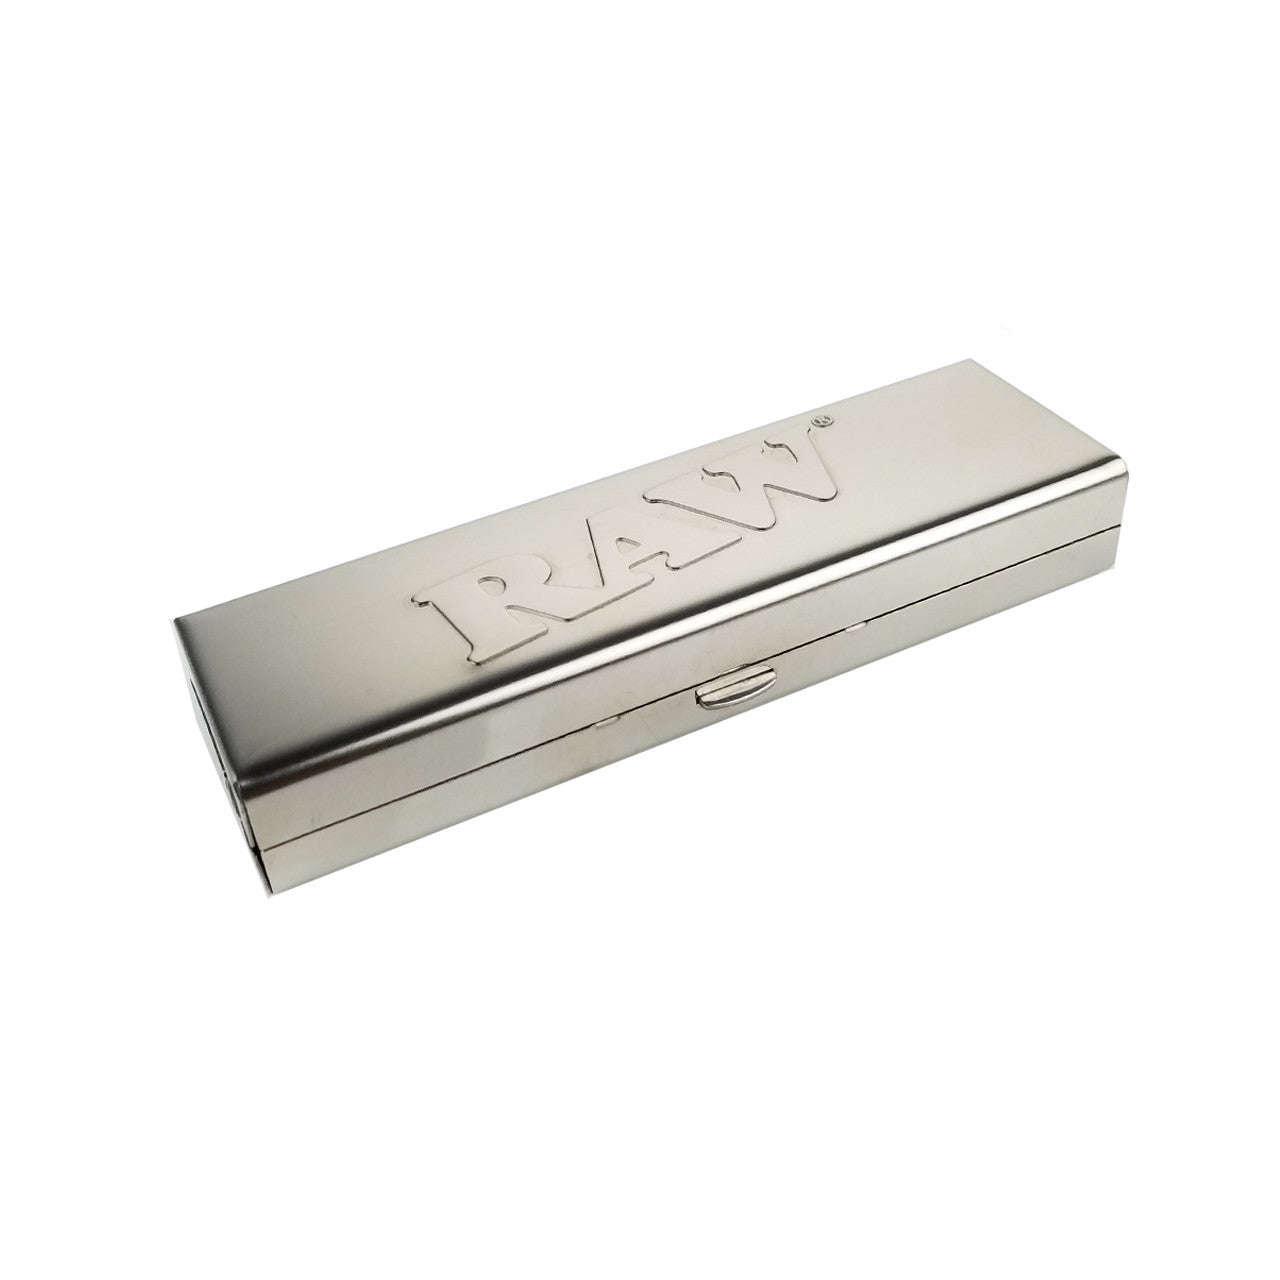 RAW Stainless Steel Case For King Size Pre-Rolled Tips